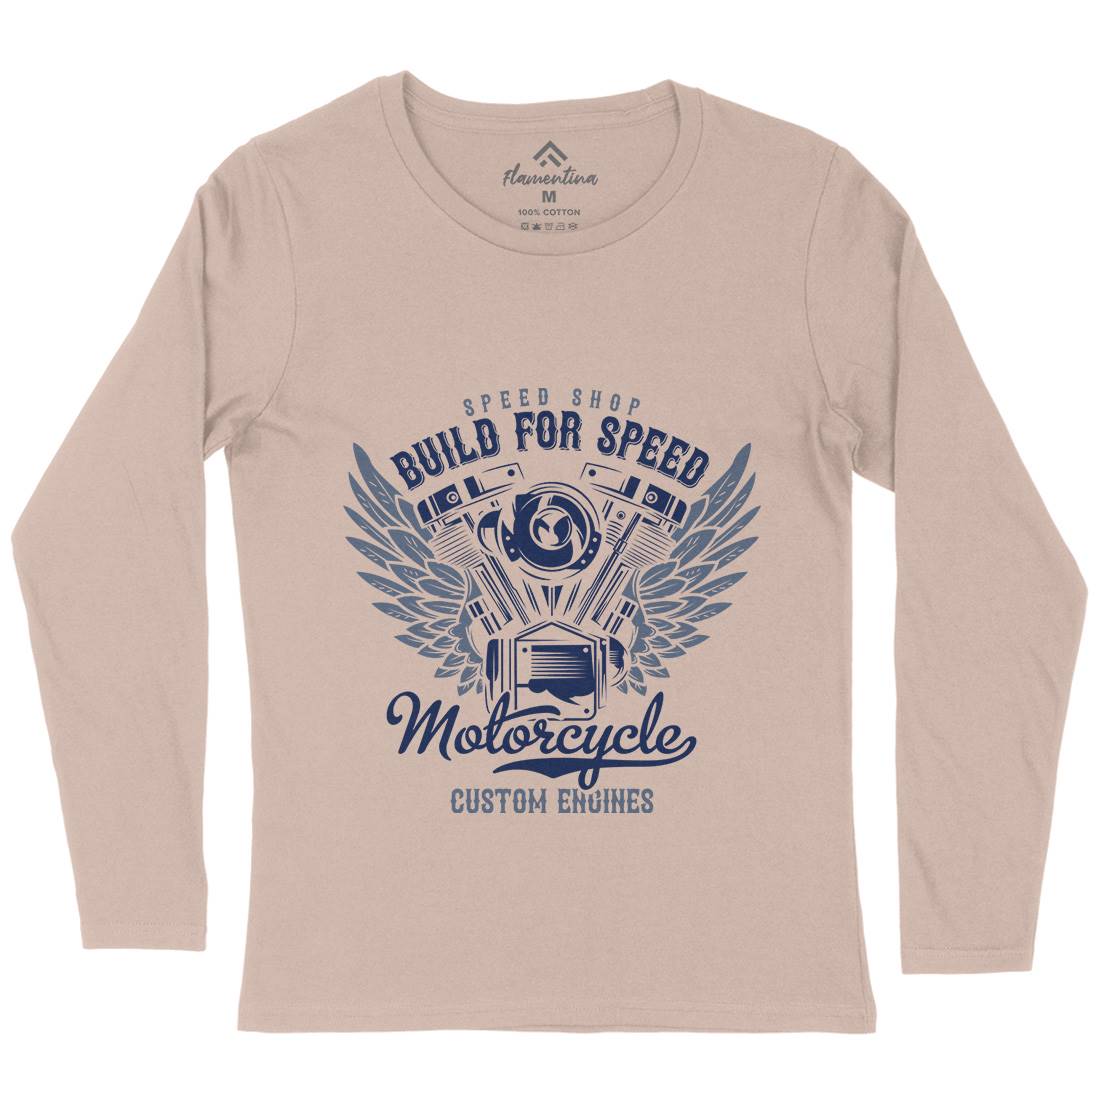 Build For Speed Womens Long Sleeve T-Shirt Motorcycles B842